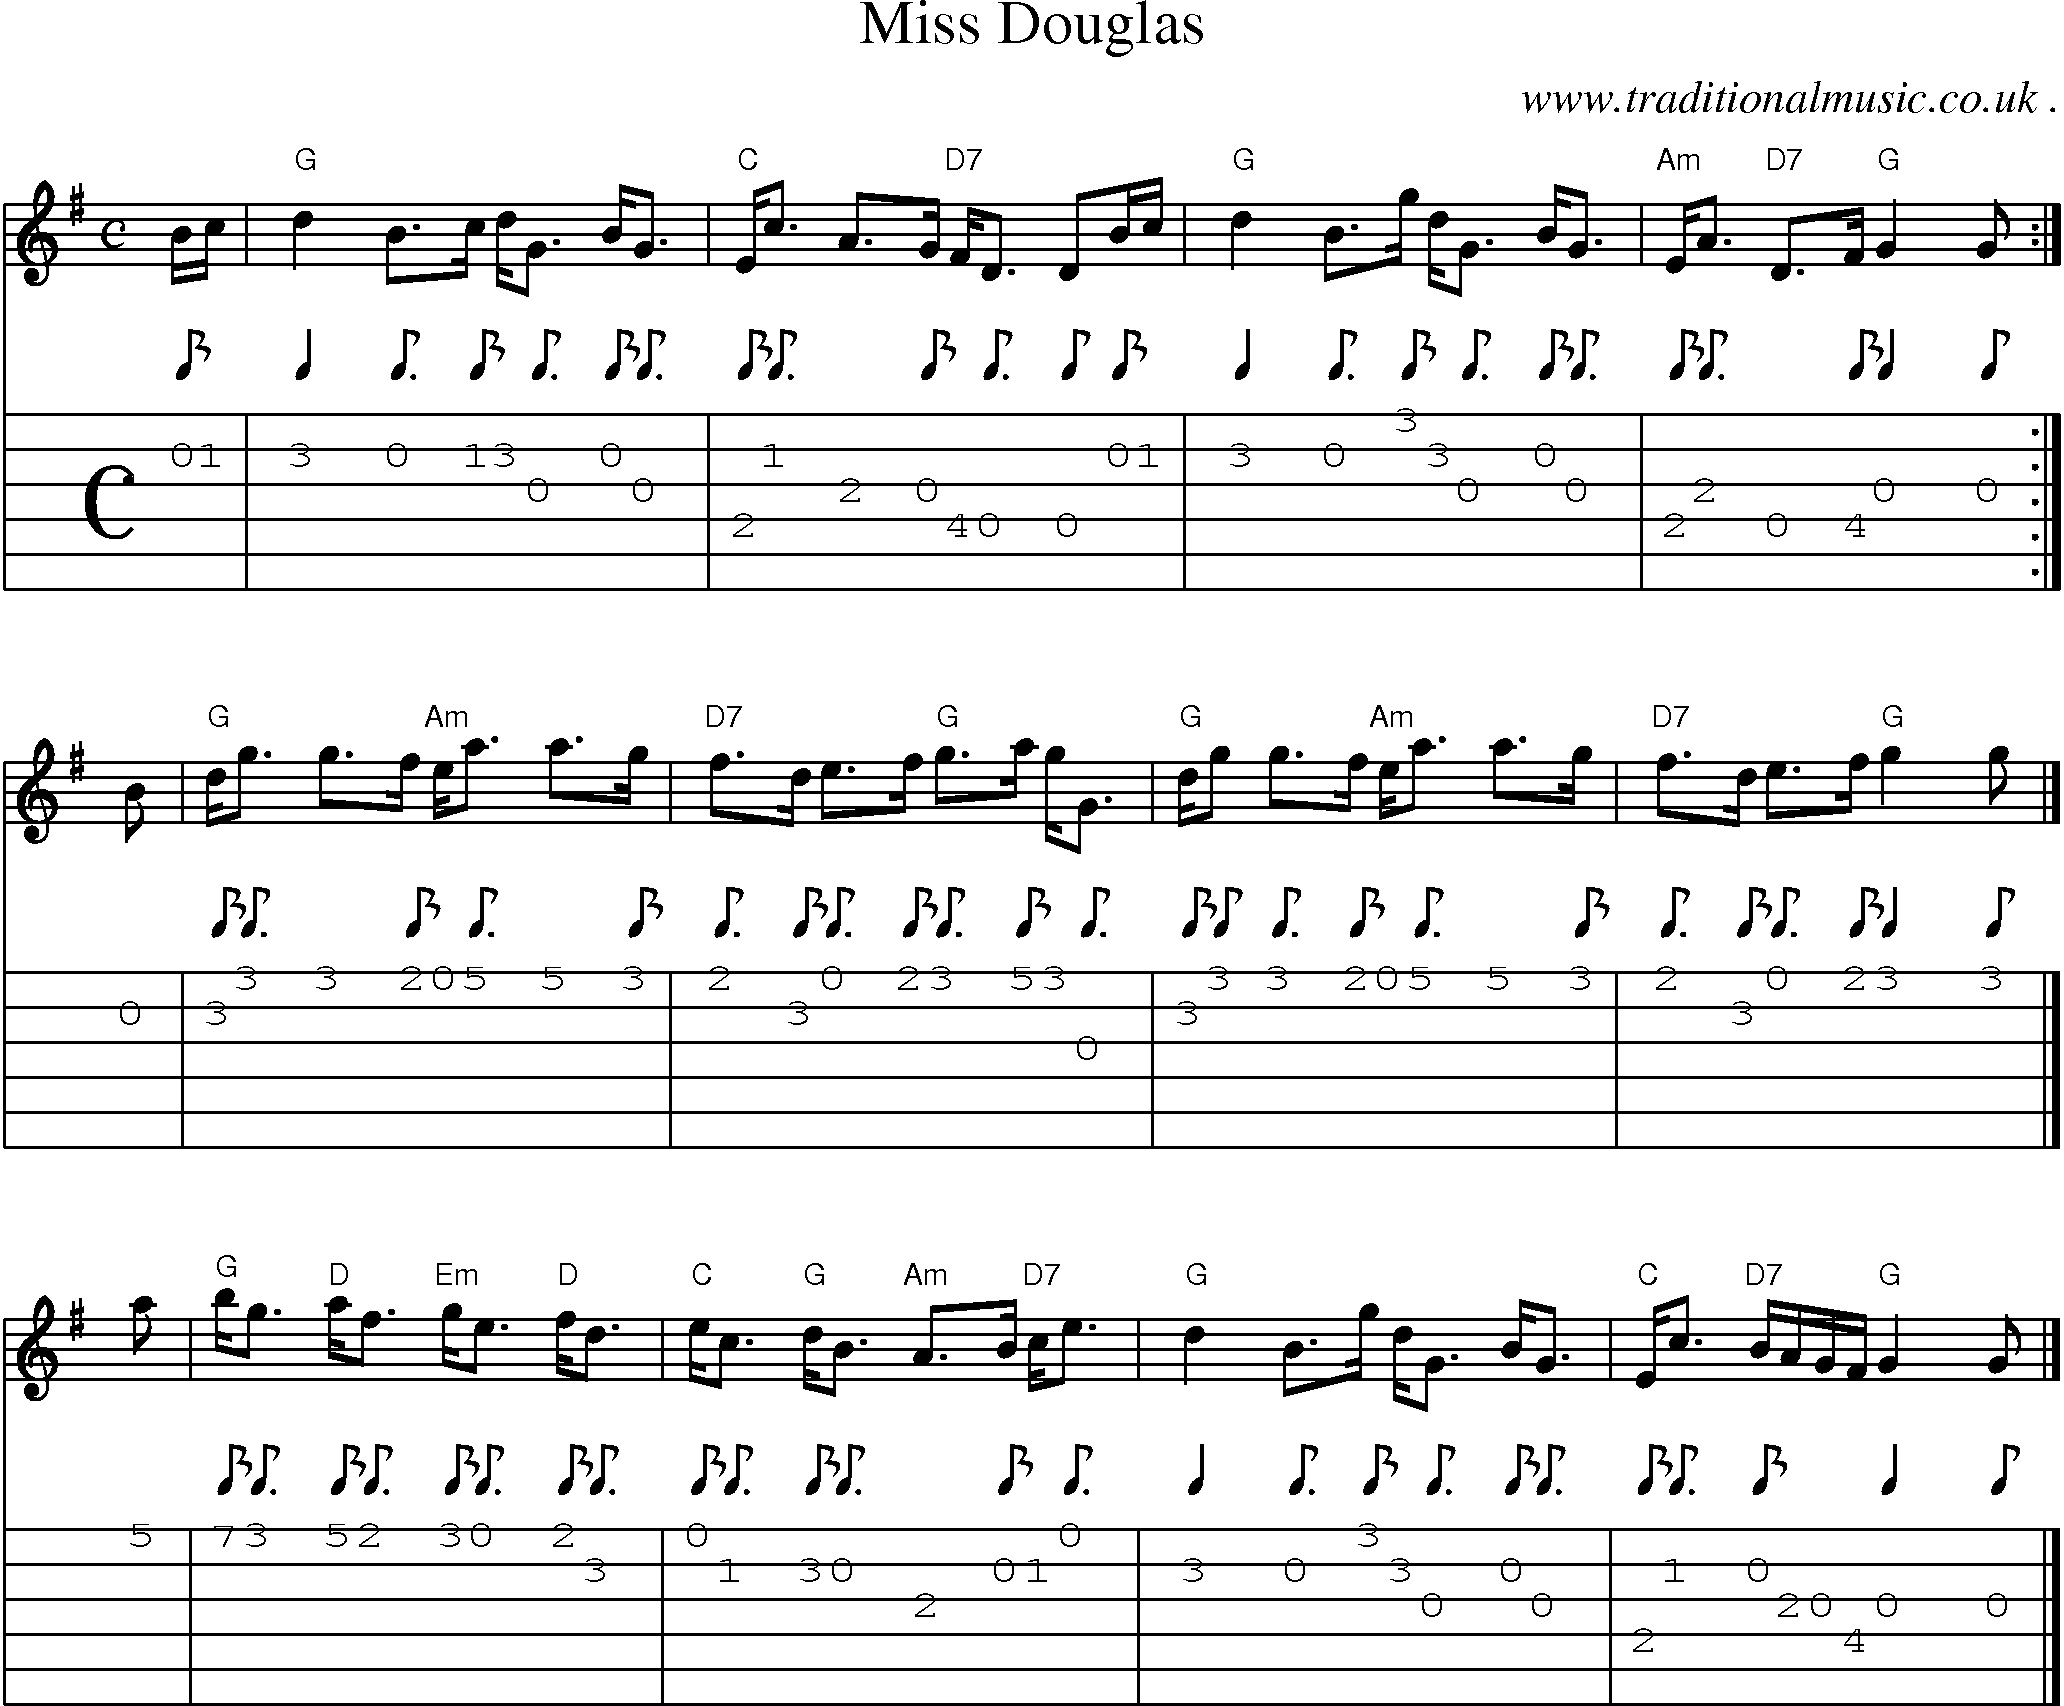 Sheet-music  score, Chords and Guitar Tabs for Miss Douglas